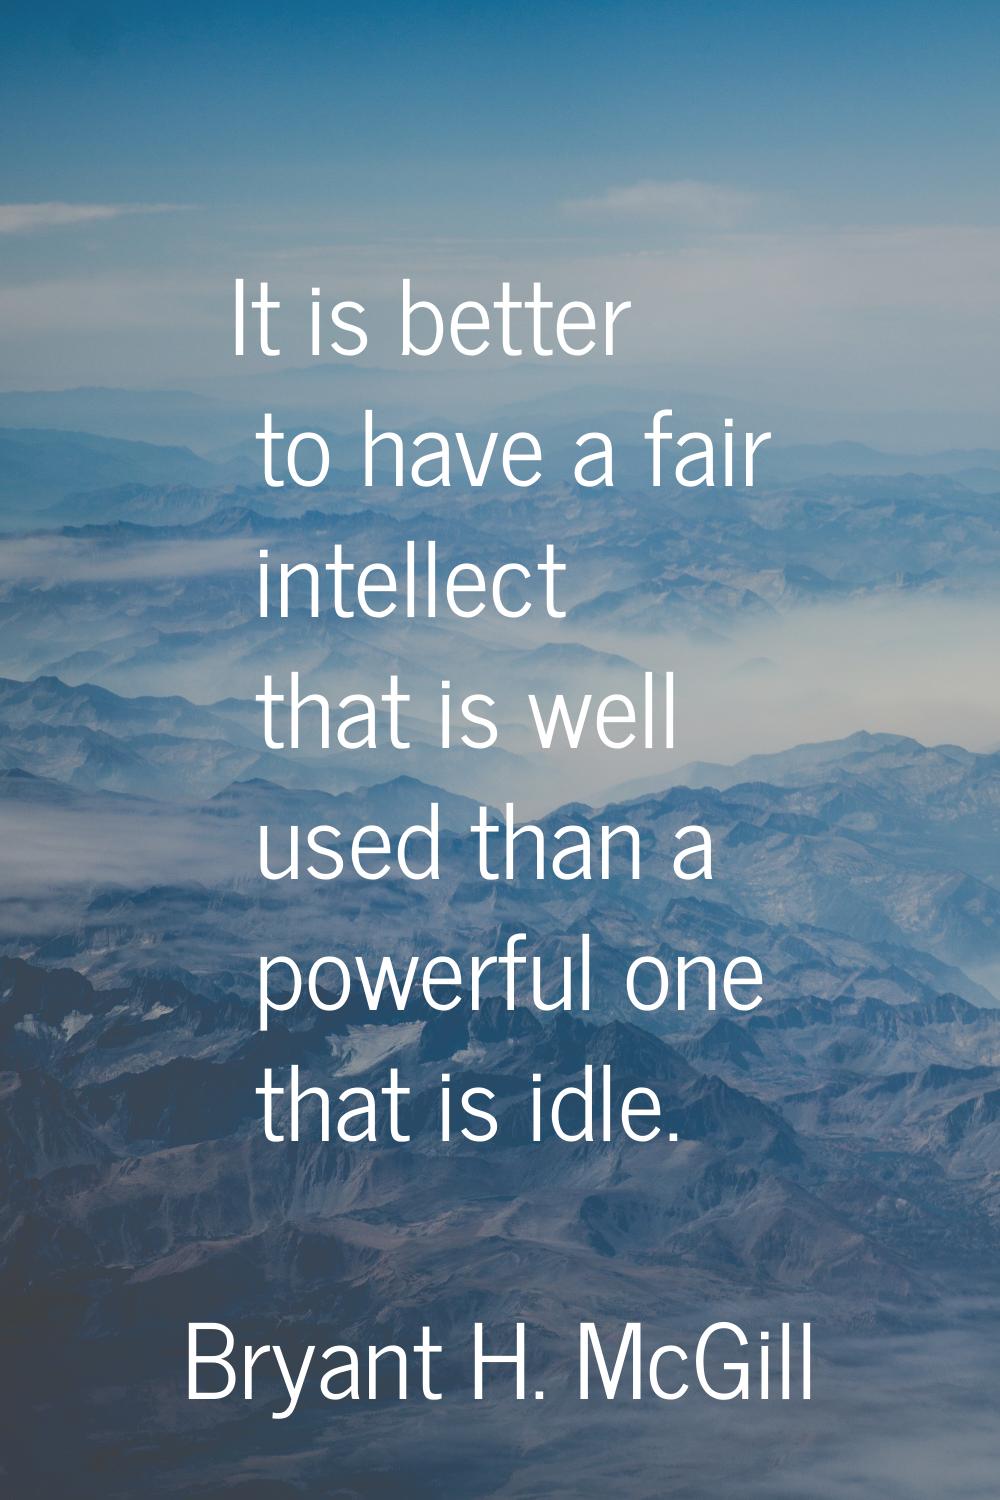 It is better to have a fair intellect that is well used than a powerful one that is idle.